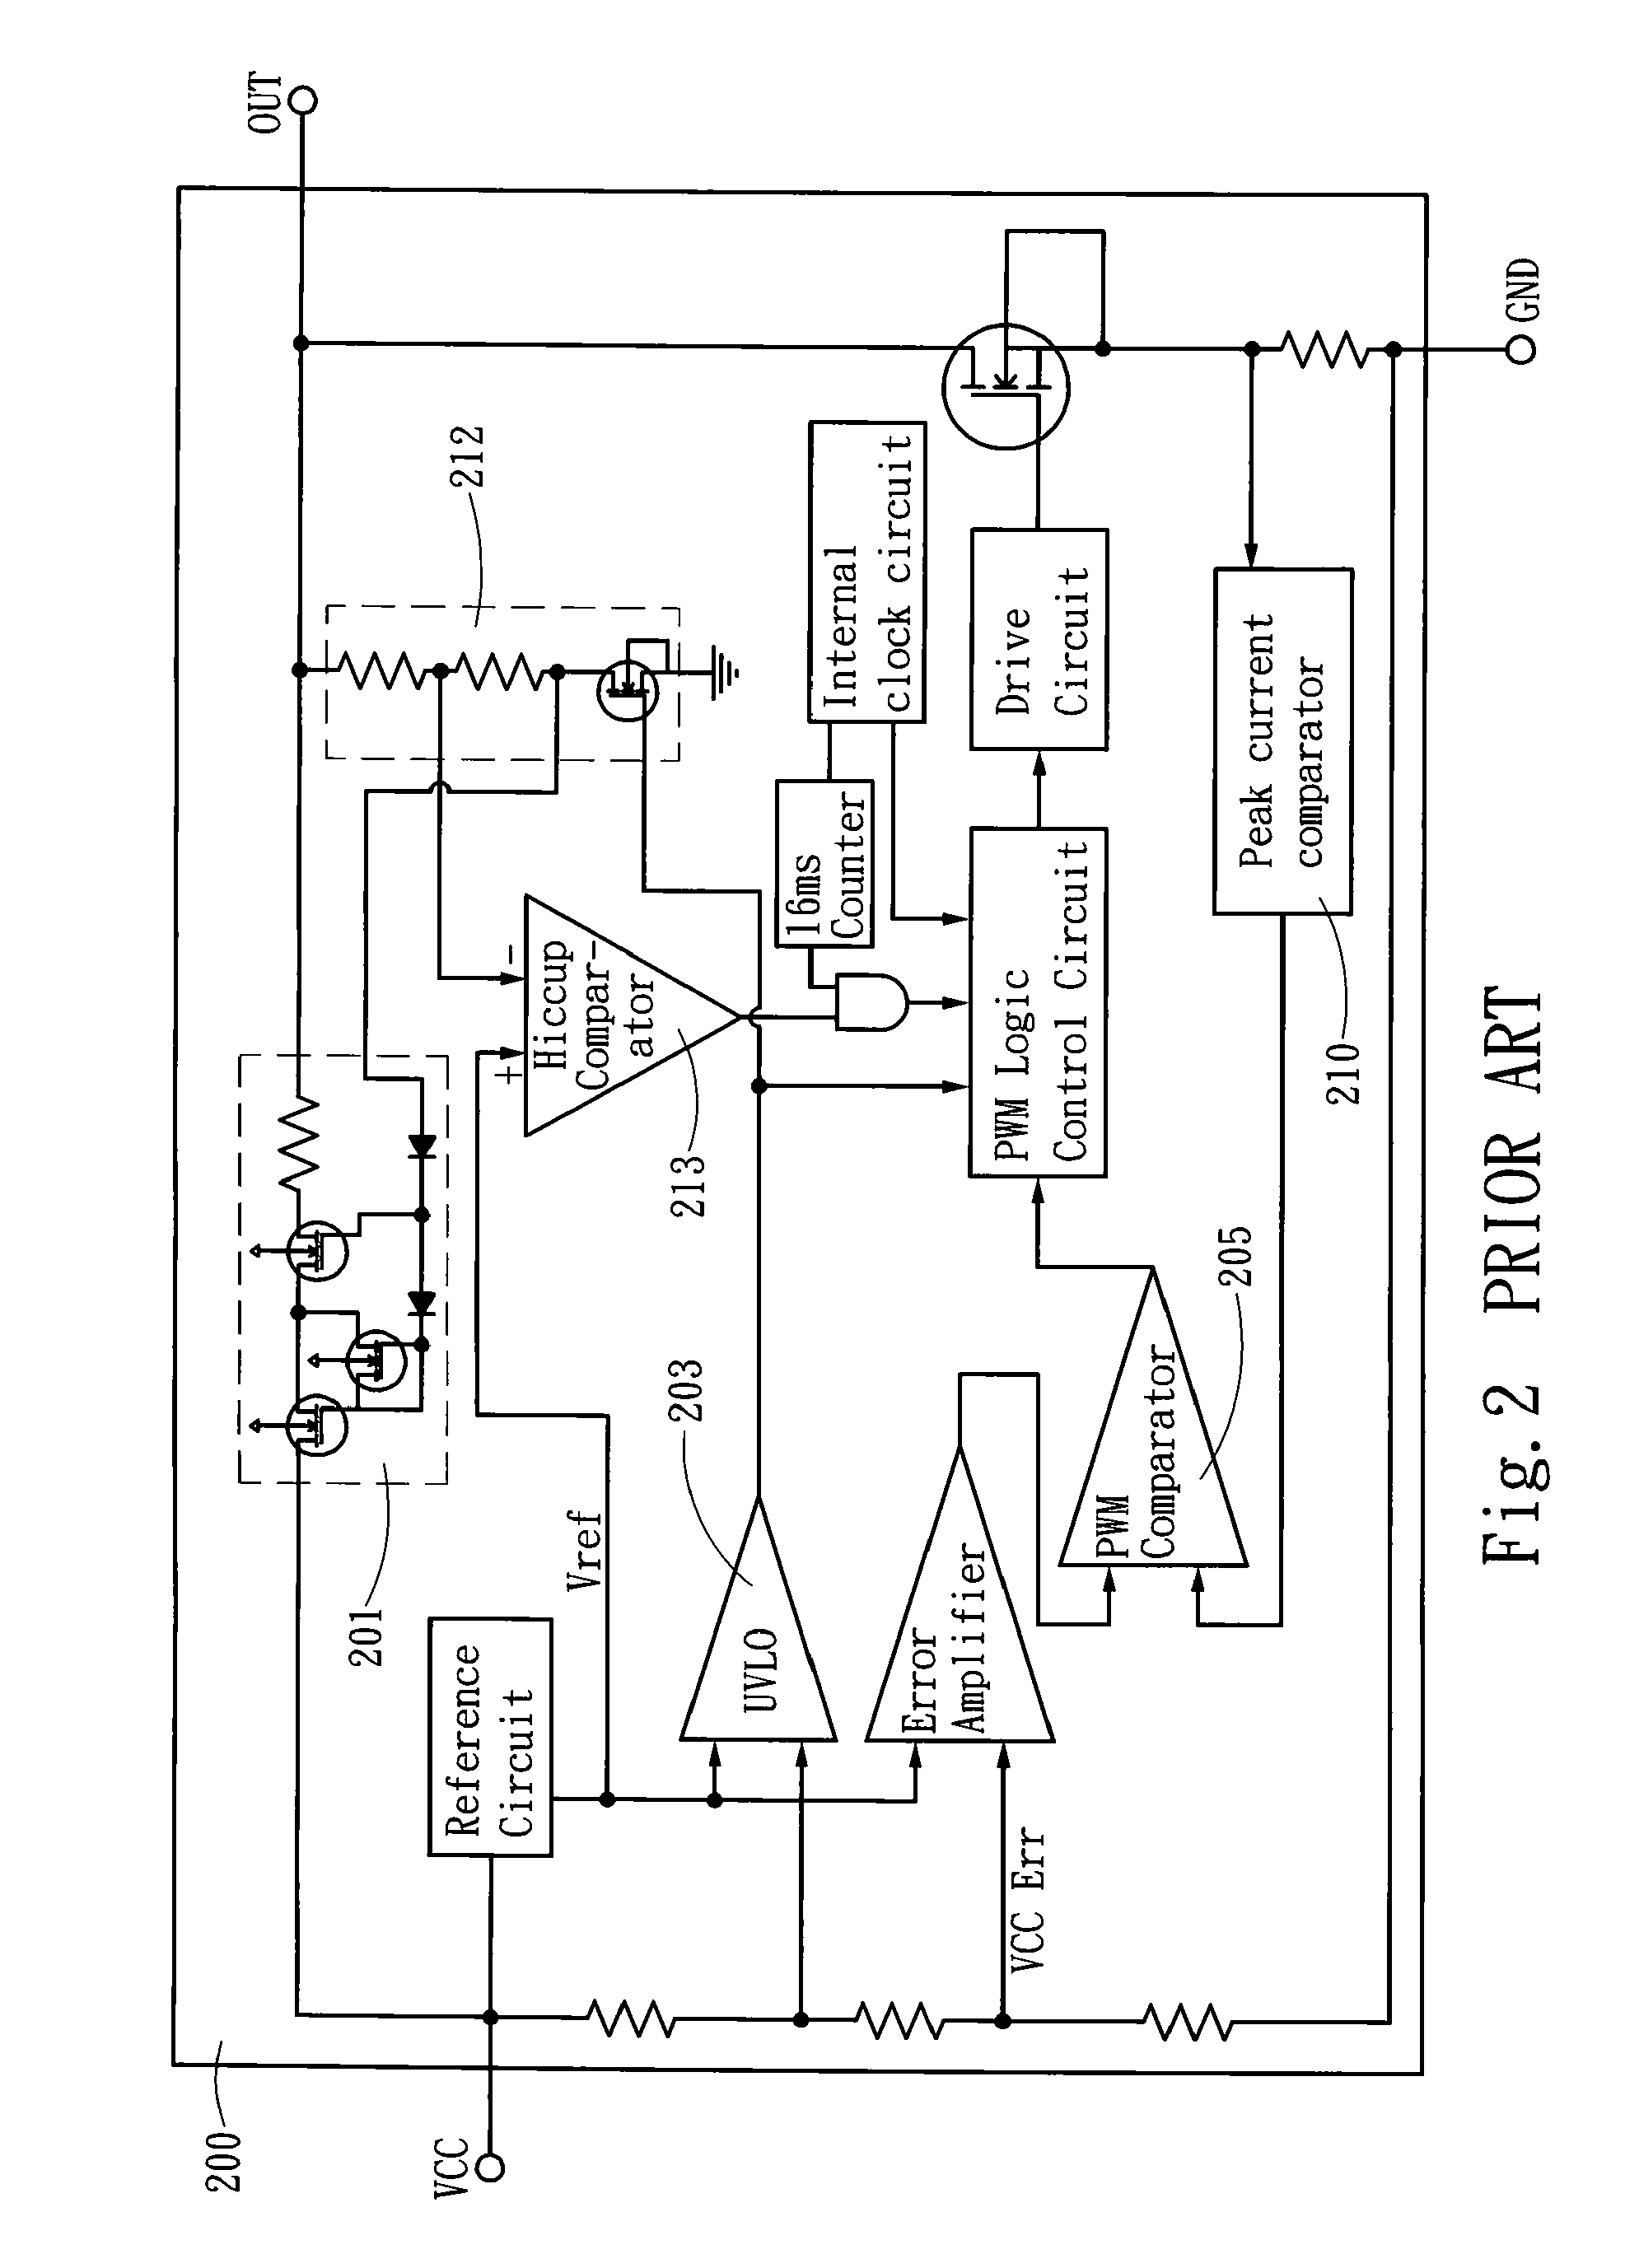 Short circuit protection circuit for a pulse width modulation (PWM) unit